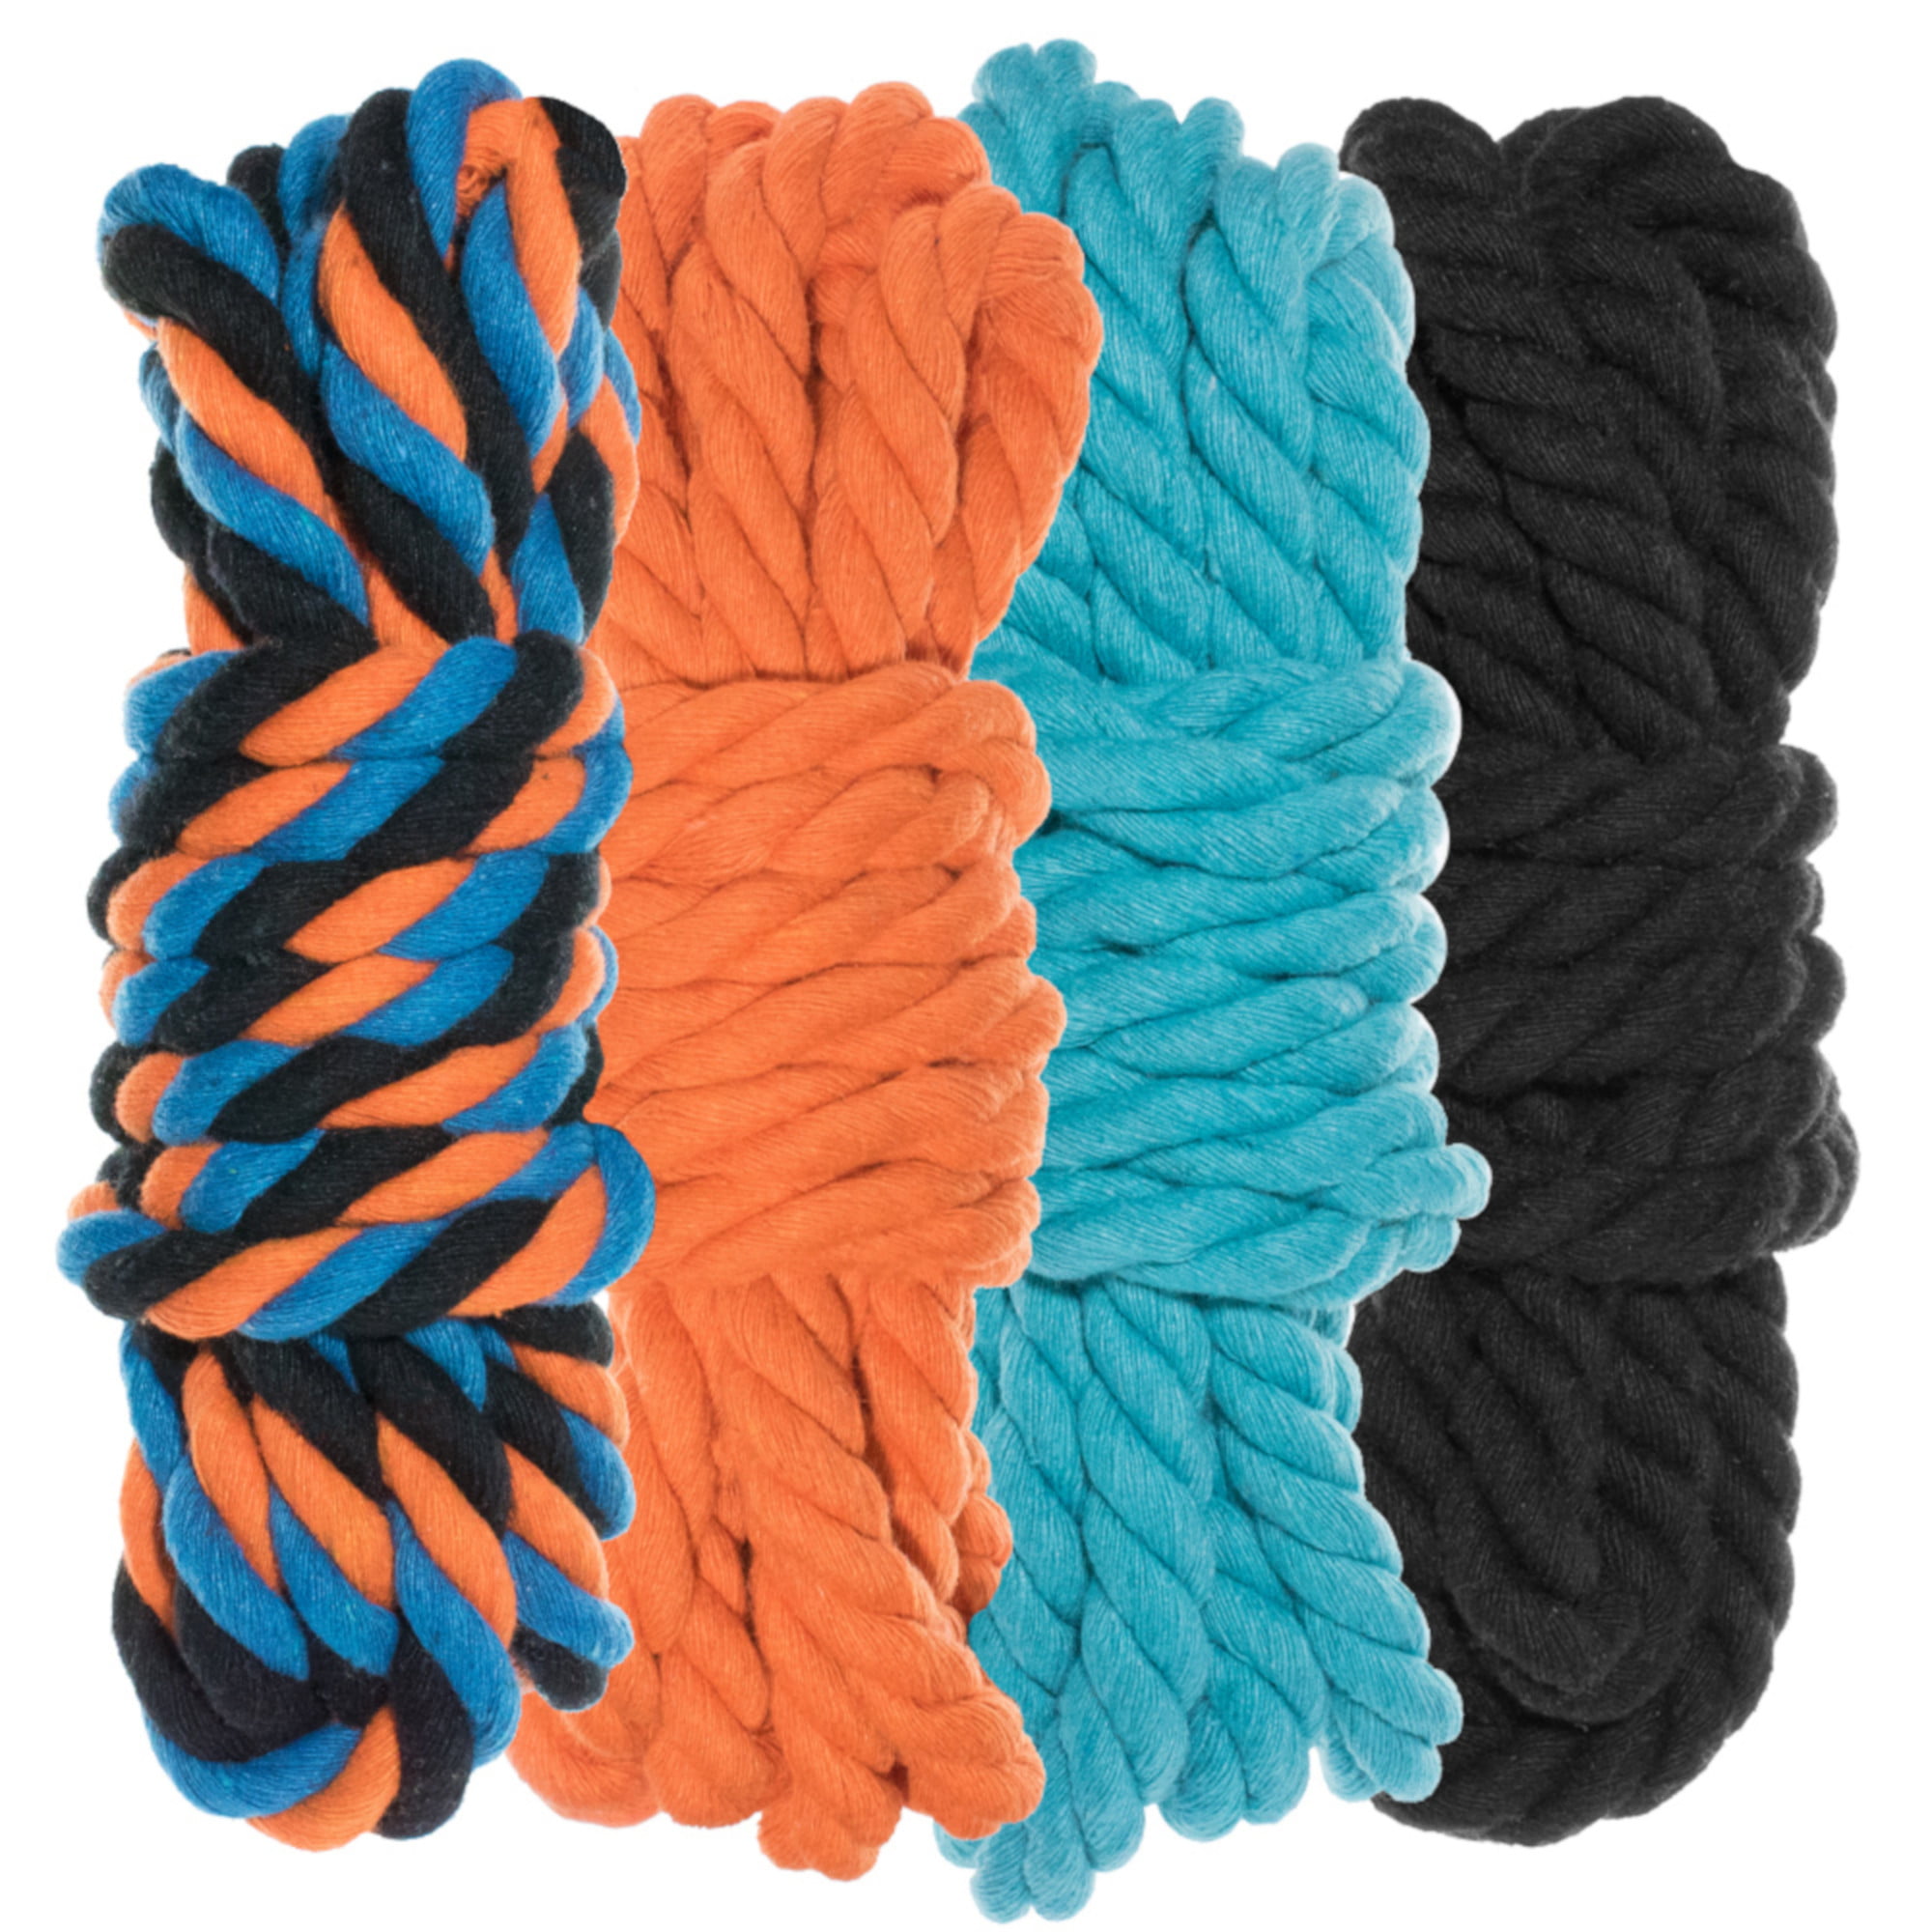 Colorful Twisted Cotton Rope 3 Strand Soft Cord for Sport Décor Pet Toys Craft 